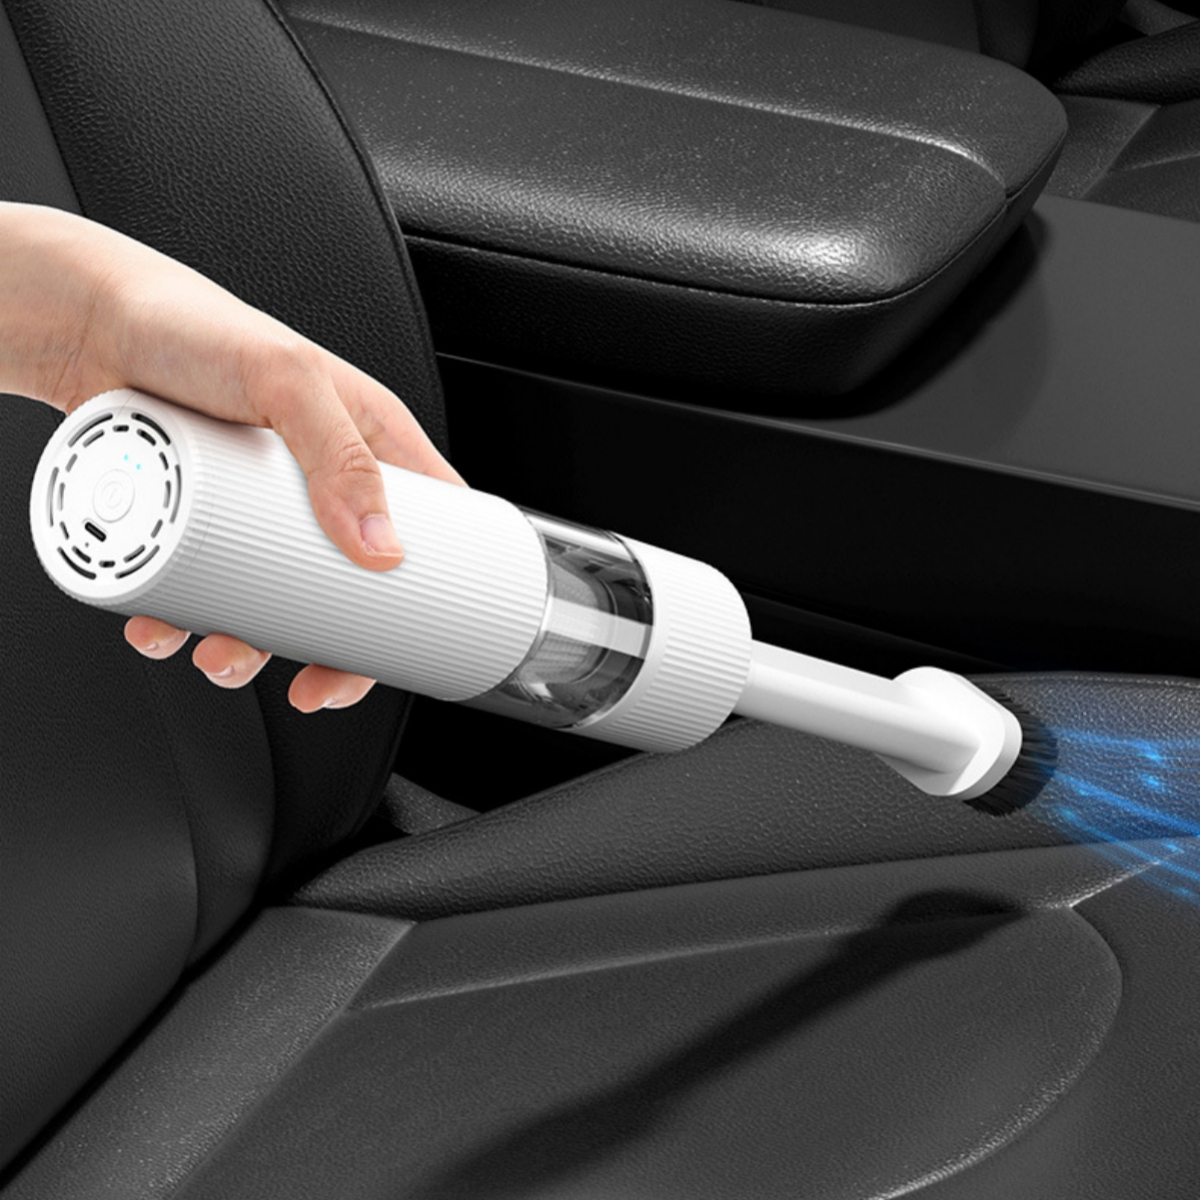 Portable by Powered Handstaubsauger, Home Cleaner Handheld USB Rechargeable Cordless SHAOKE Vacuum Staubsauger Powerful